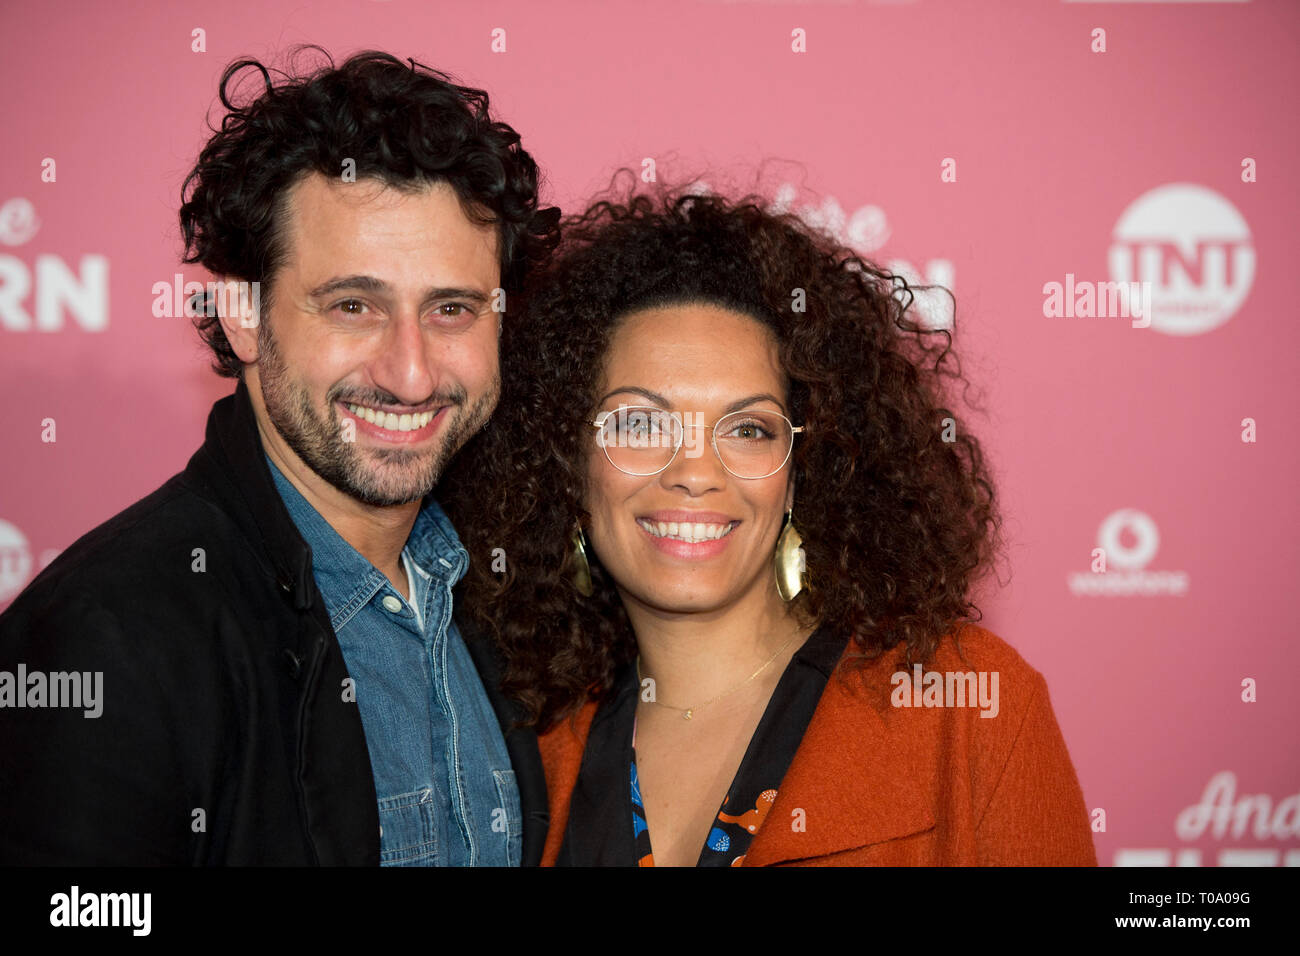 Rebecca LIMA, actress, Serkan KAYA, actor, portrait, portrÃ t, portrait, cropped single image, single motive, red carpet, red carpet show, arrival, arrival, premiere 'Other Parents' on 14th March 2019 at the Residenz cinema in Koeln. | Usage worldwide Stock Photo